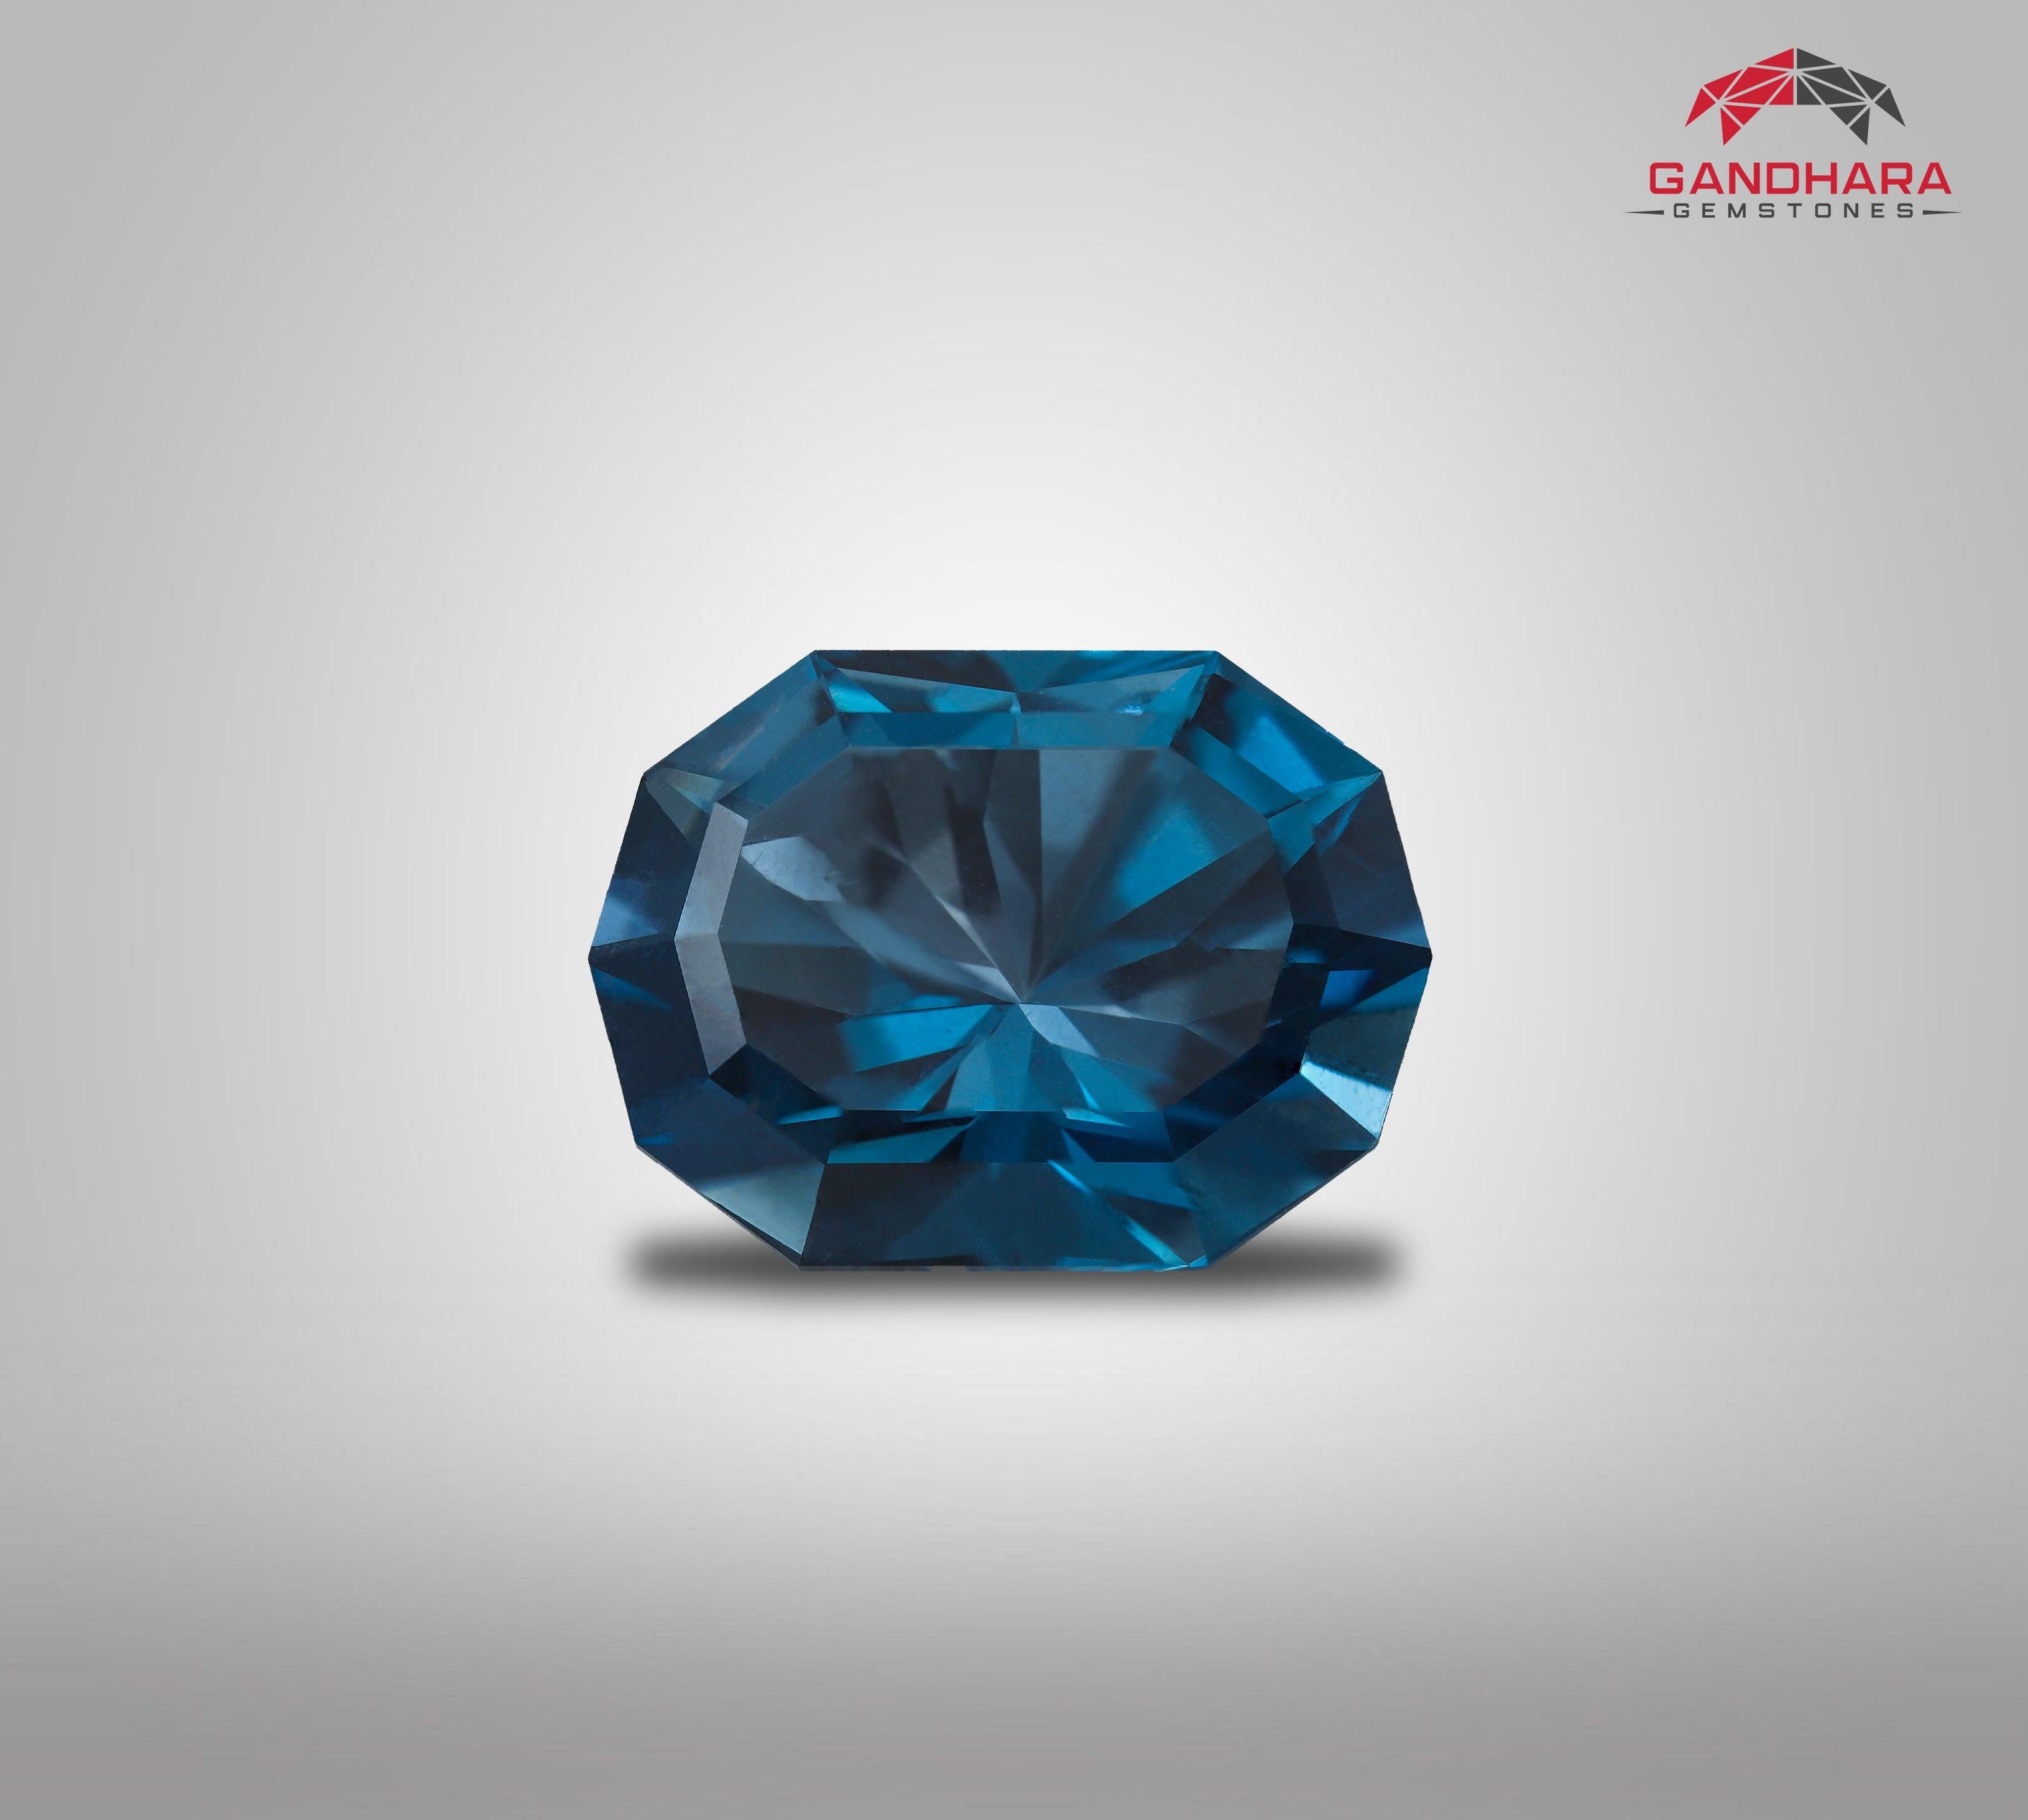 Stunning Deep London Blue Topaz, available for sale at wholesale price, natural high-quality 18.25 carats  Loop Clean clarity, certified topaz from Africa.

Product Information:
GEMSTONE NAME	Stunning Deep London Blue Topaz
WEIGHT	18.25